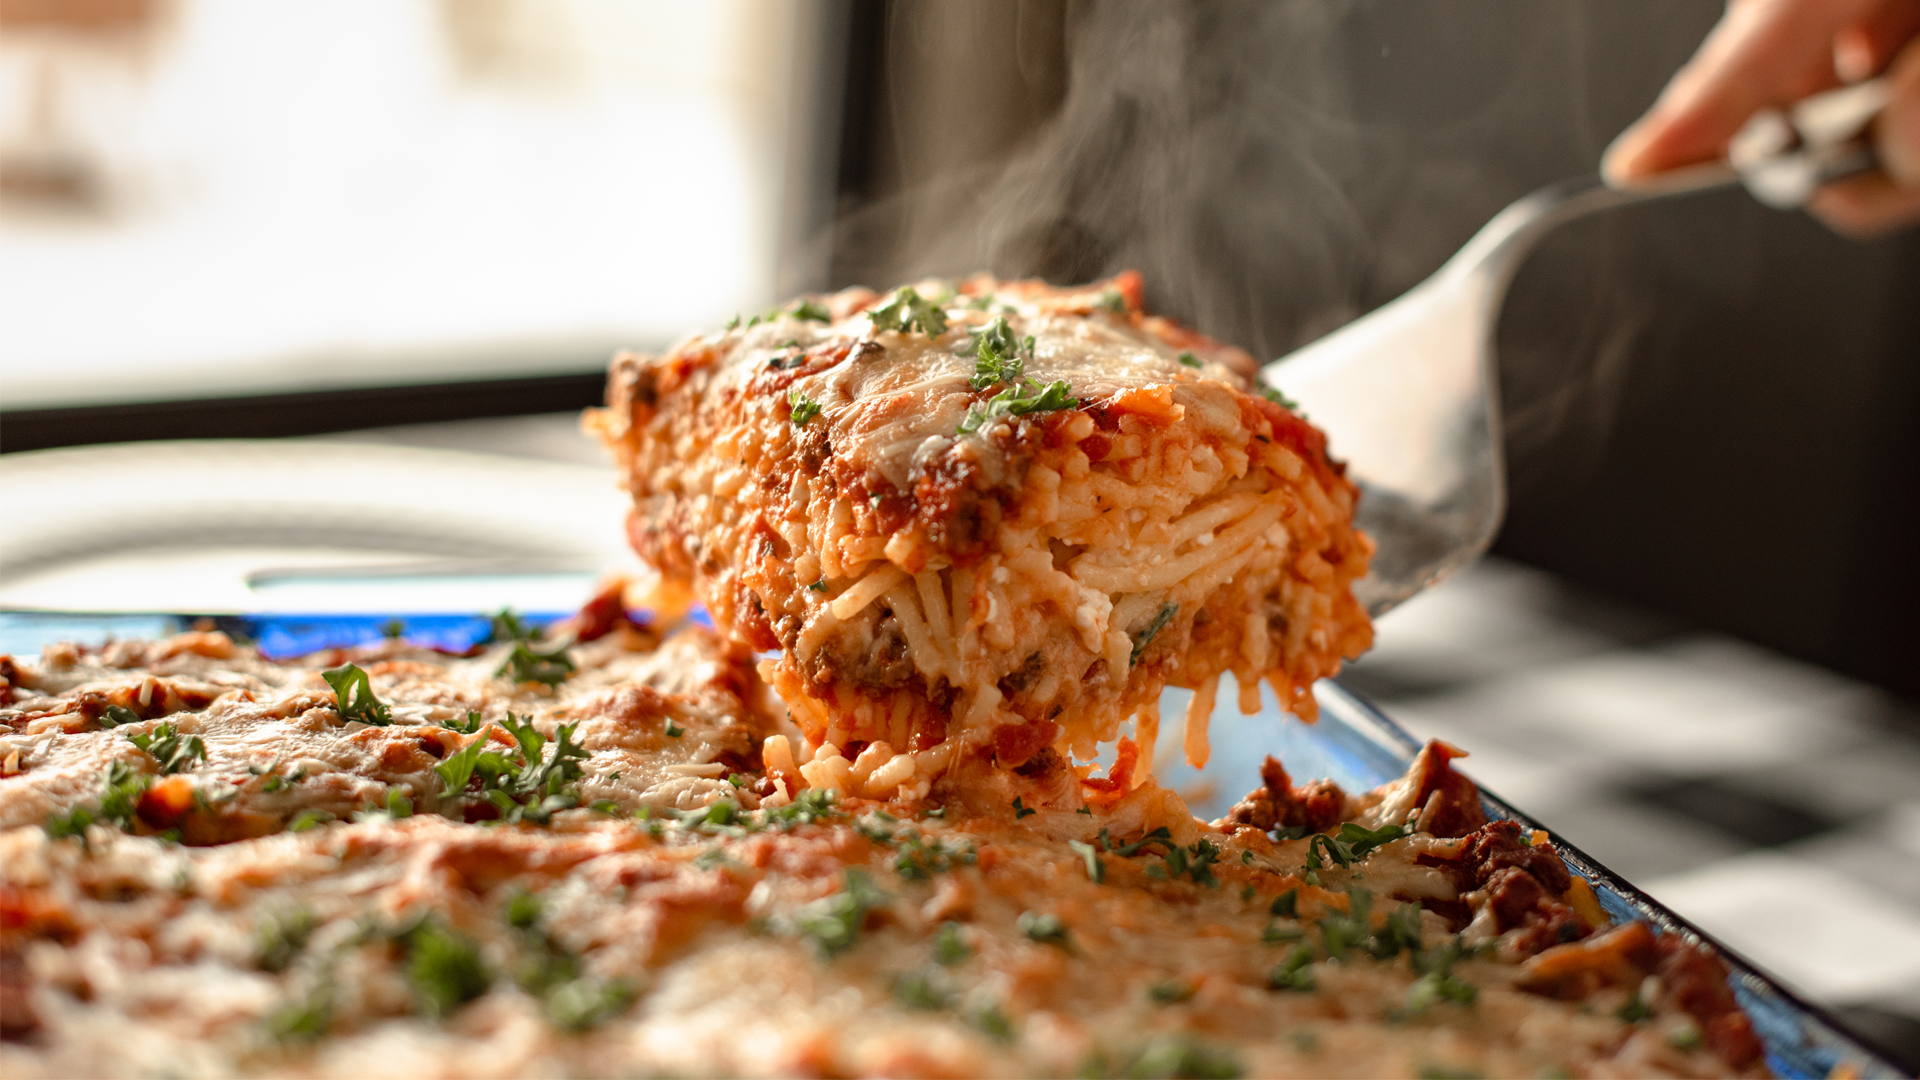 Comforting Baked Spaghetti with Homemade Garlic Bread